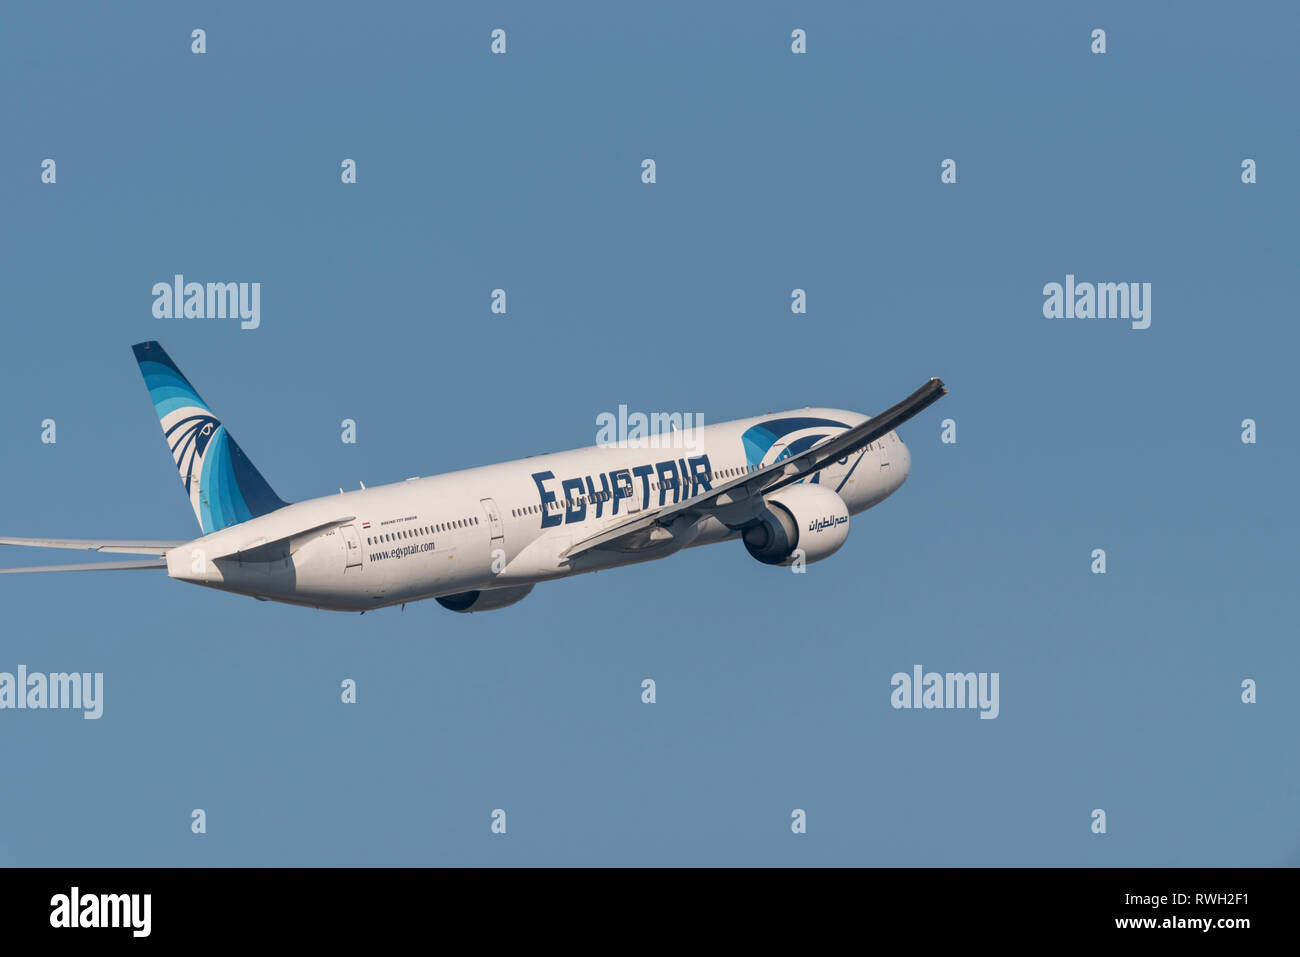 Egyptair Boeing 777 jet plane airliner SU-GDO taking off from London Heathrow Airport, UK, in blue sky Stock Photo